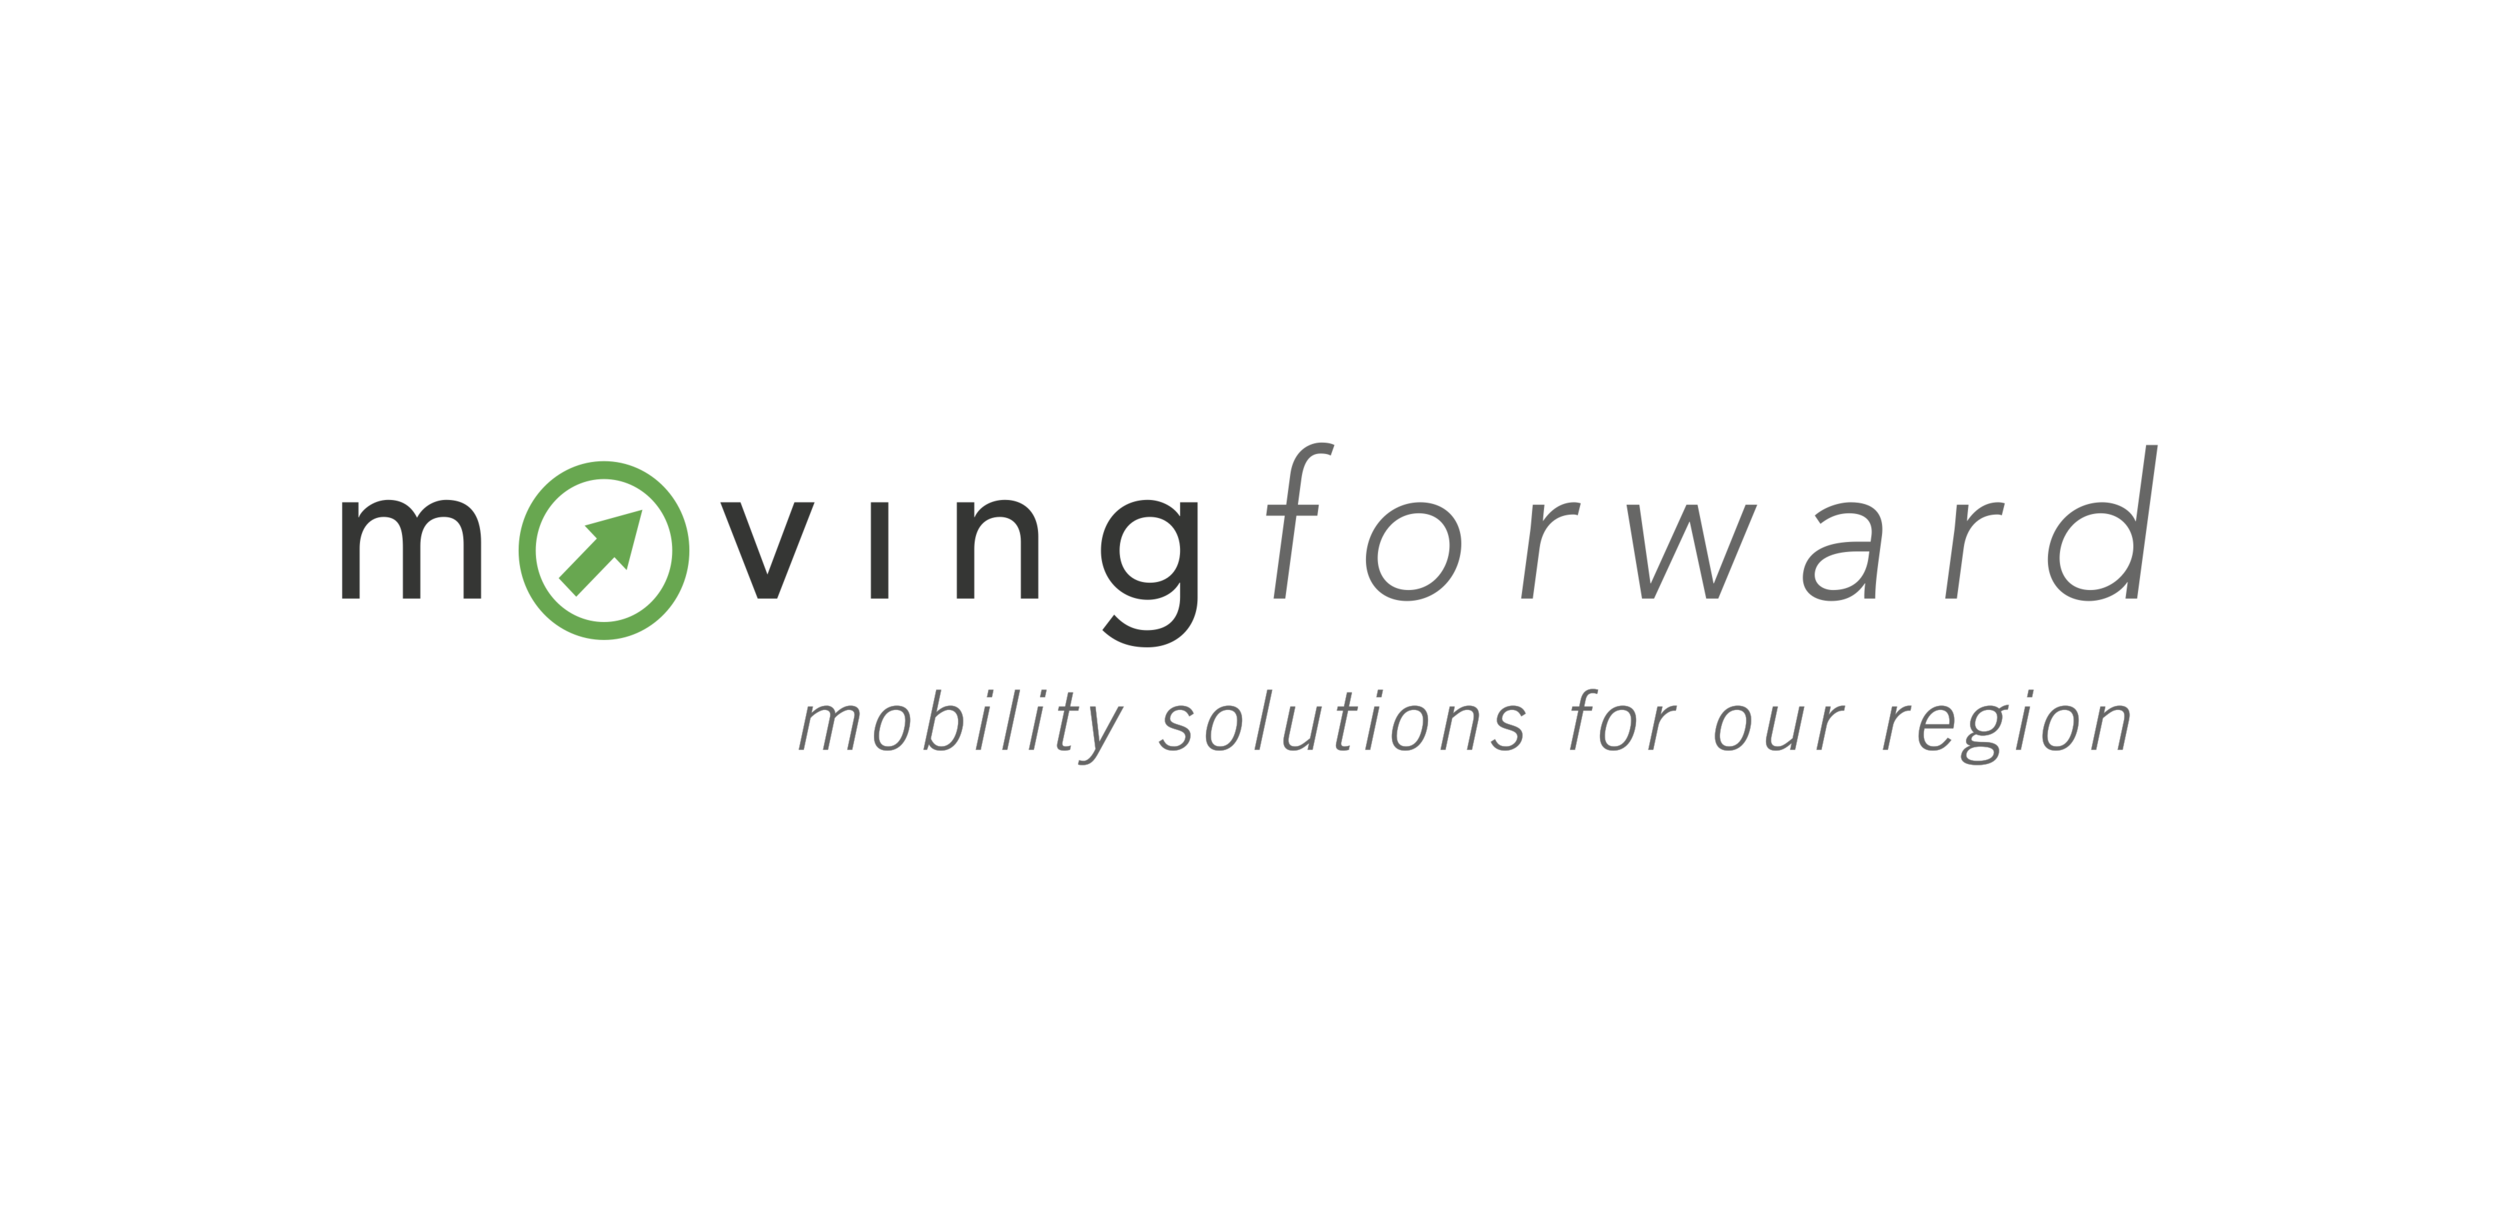 Moving Forward: Mobility Solutions for Our Region